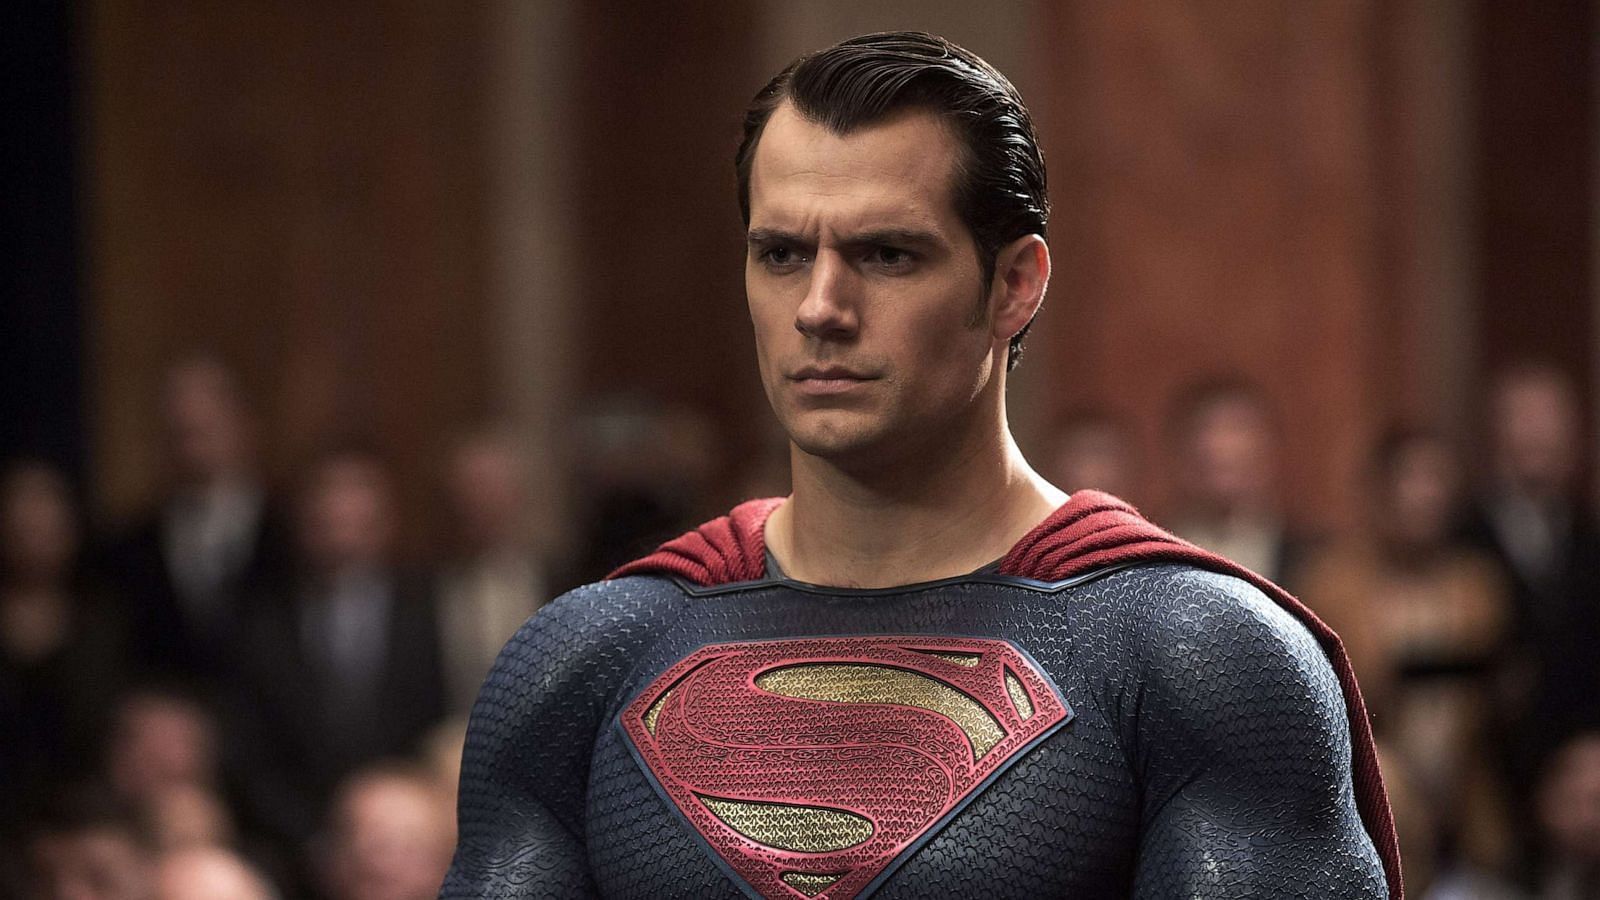 The Man of Steel emerges: Henry Cavill's deleted Superman scene unveiled in The Flash's alternate ending (Image via Warner Bros)